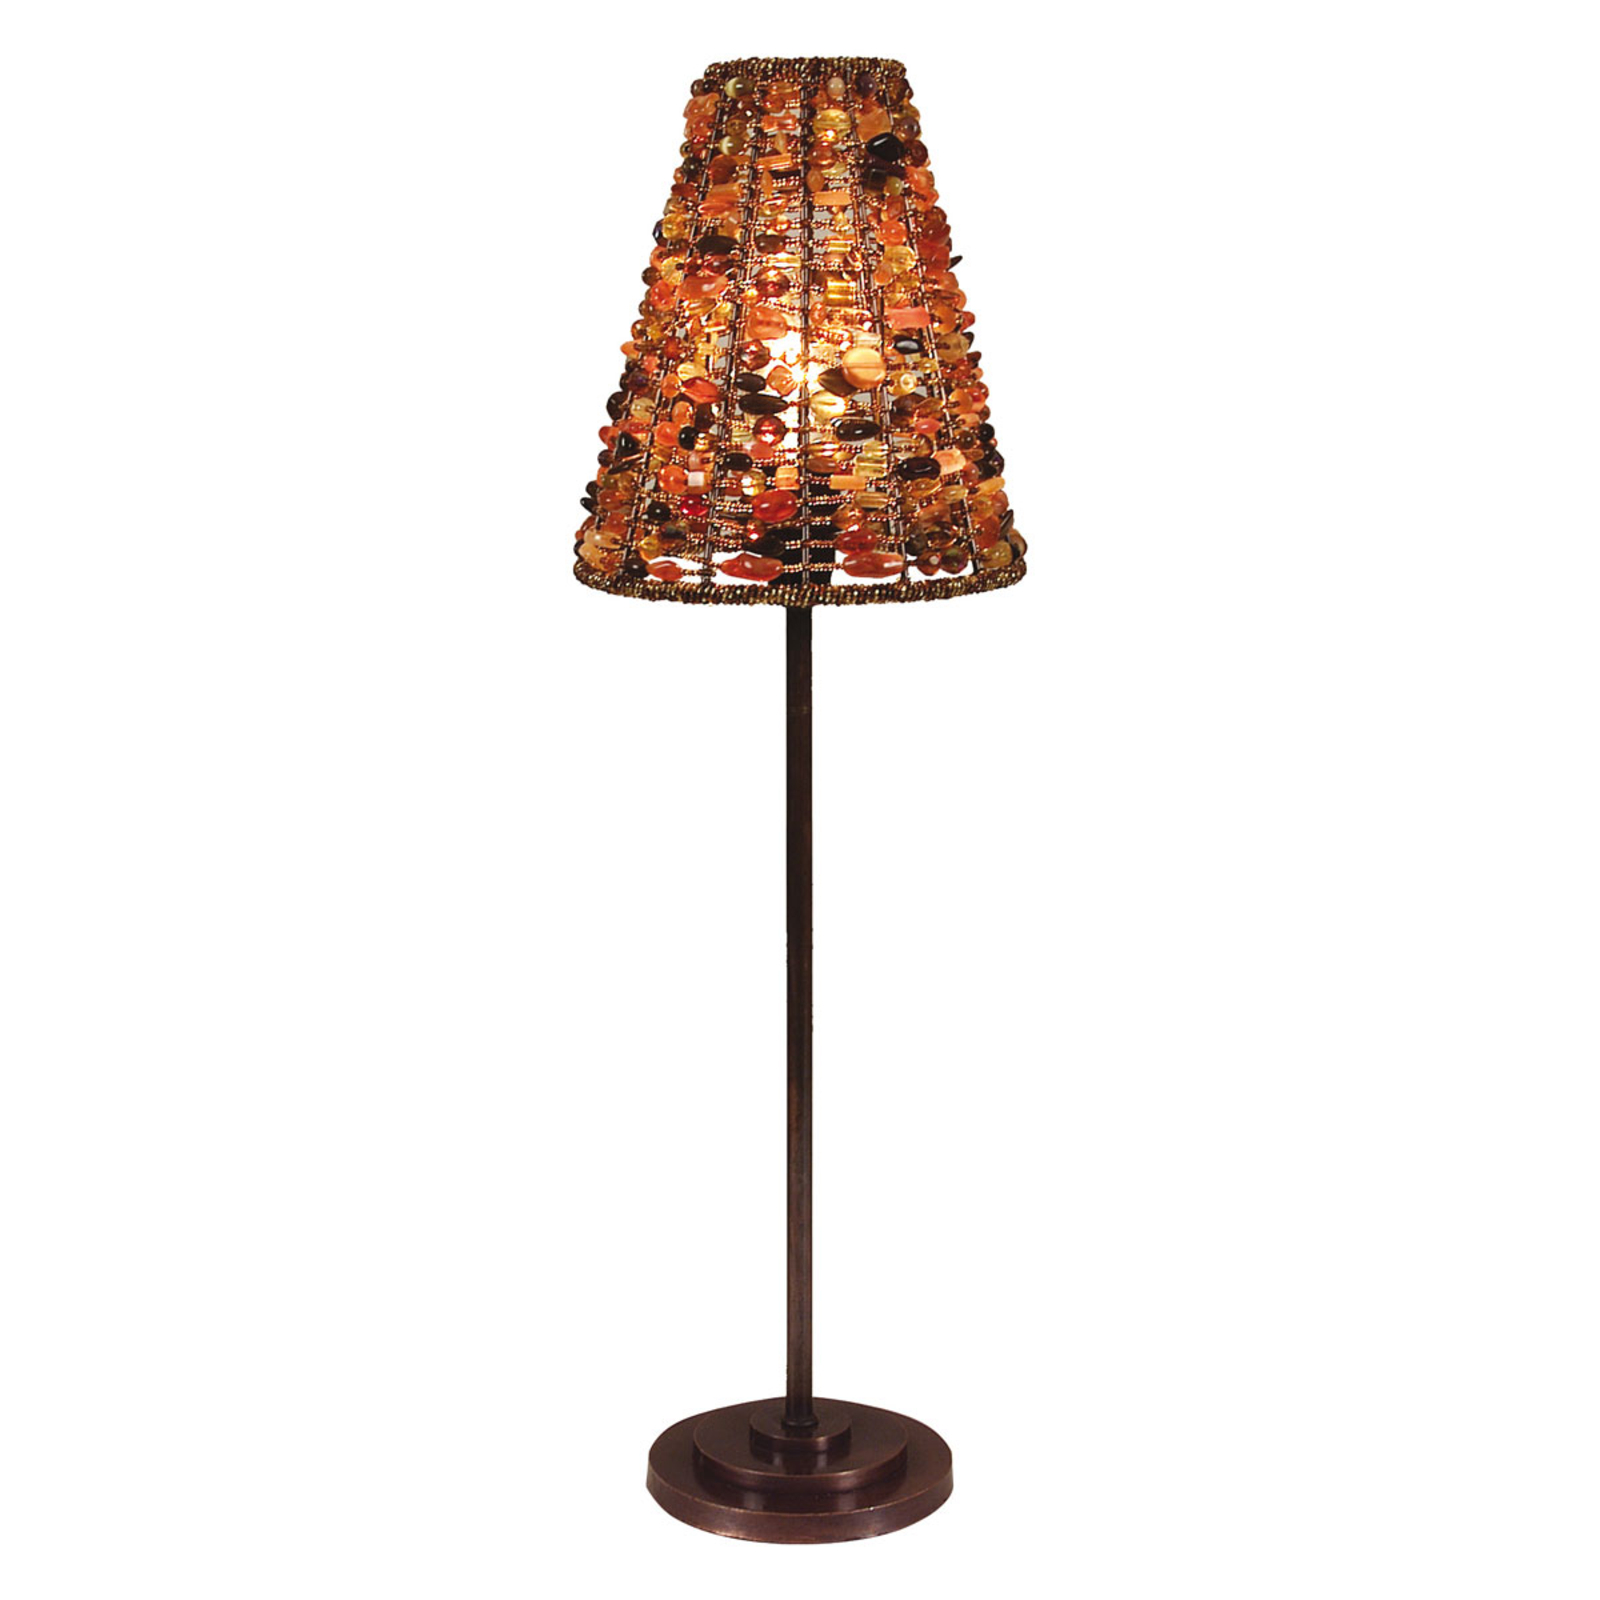 Bella table lamp with round lampshade/base